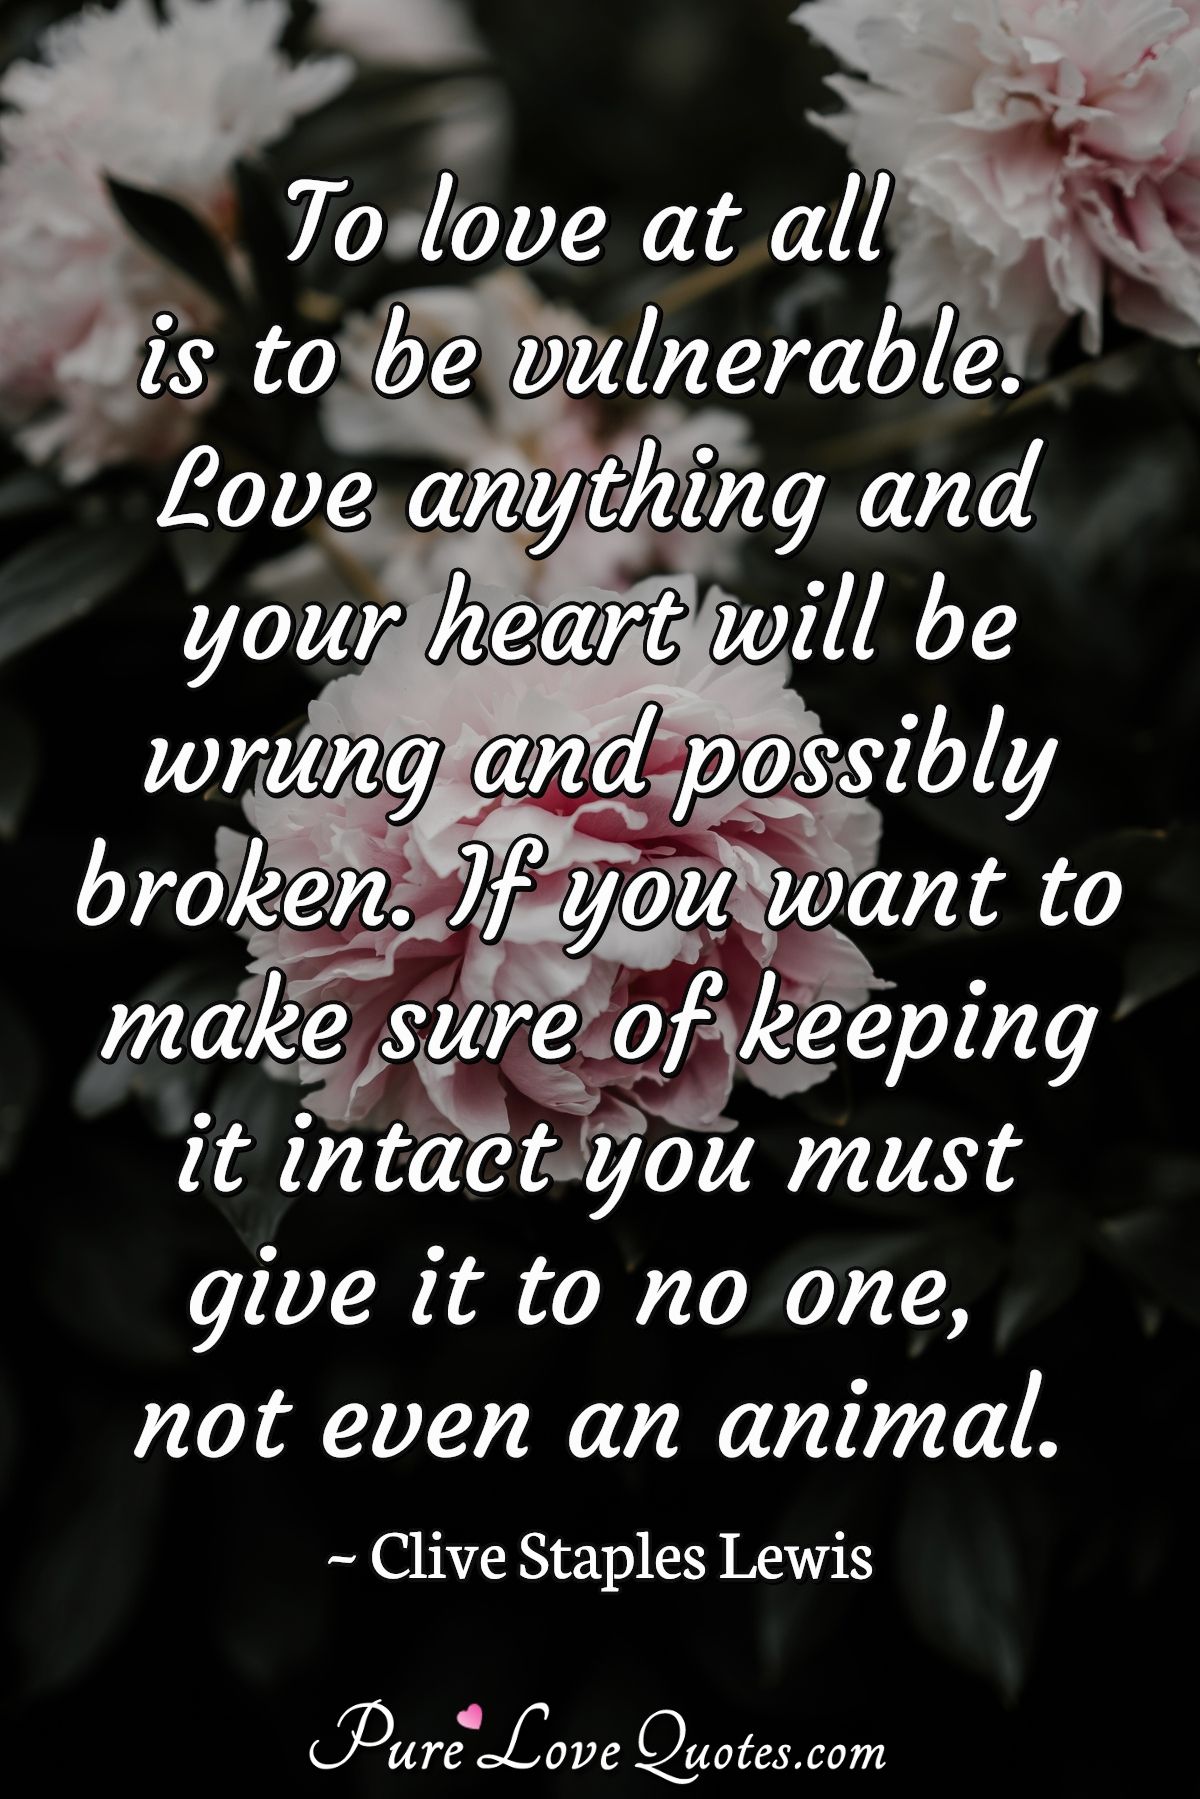 To love at all is to be vulnerable. Love anything and your heart will be wrung and possibly broken. If you want to make sure of keeping it intact you must give it to no one, not even an animal. - Clive Staples Lewis